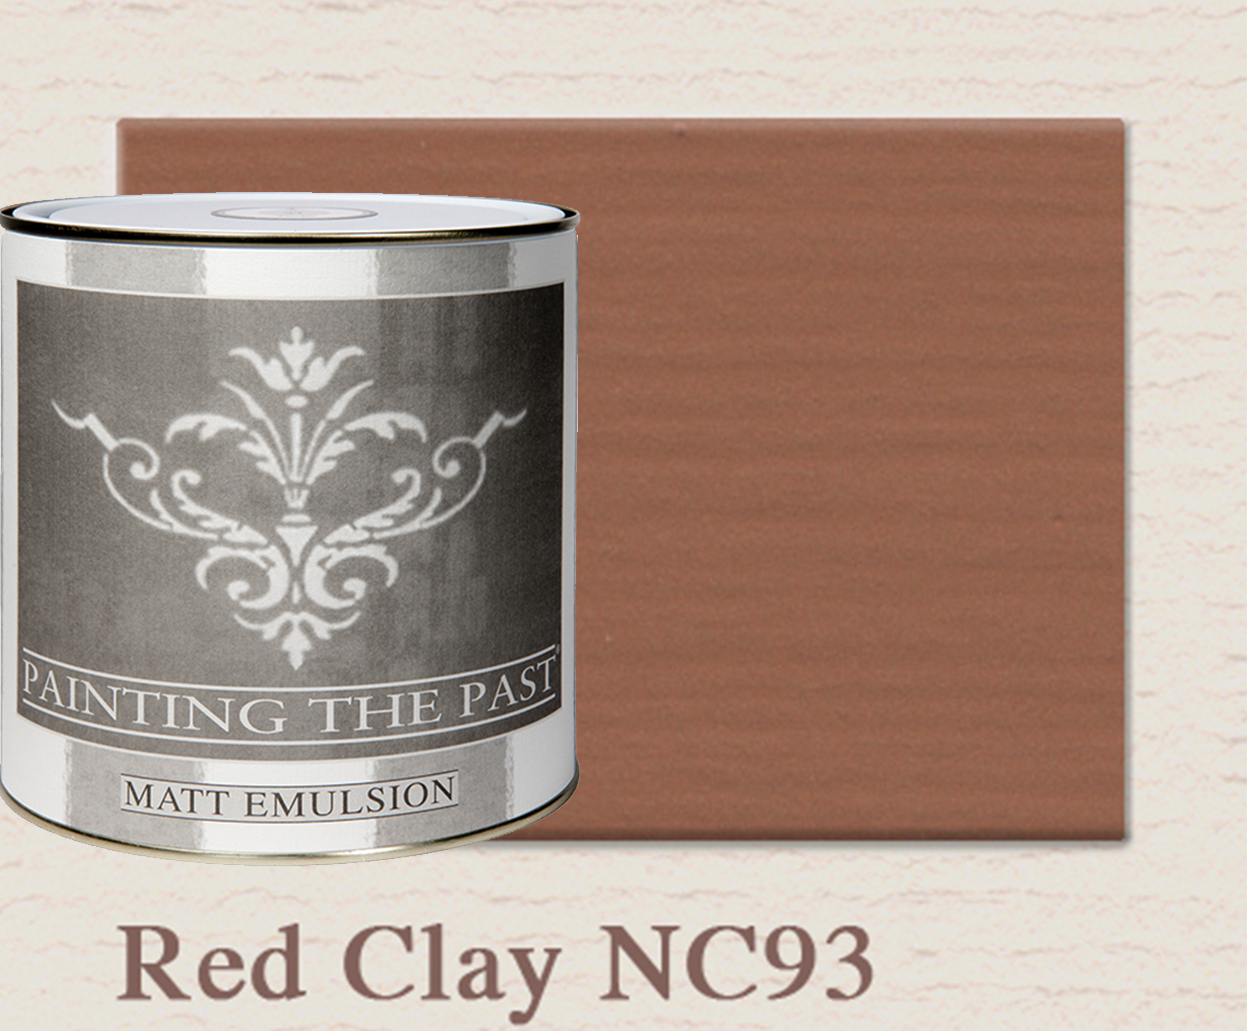 Painting The Past Matt Emulsion Red Clay